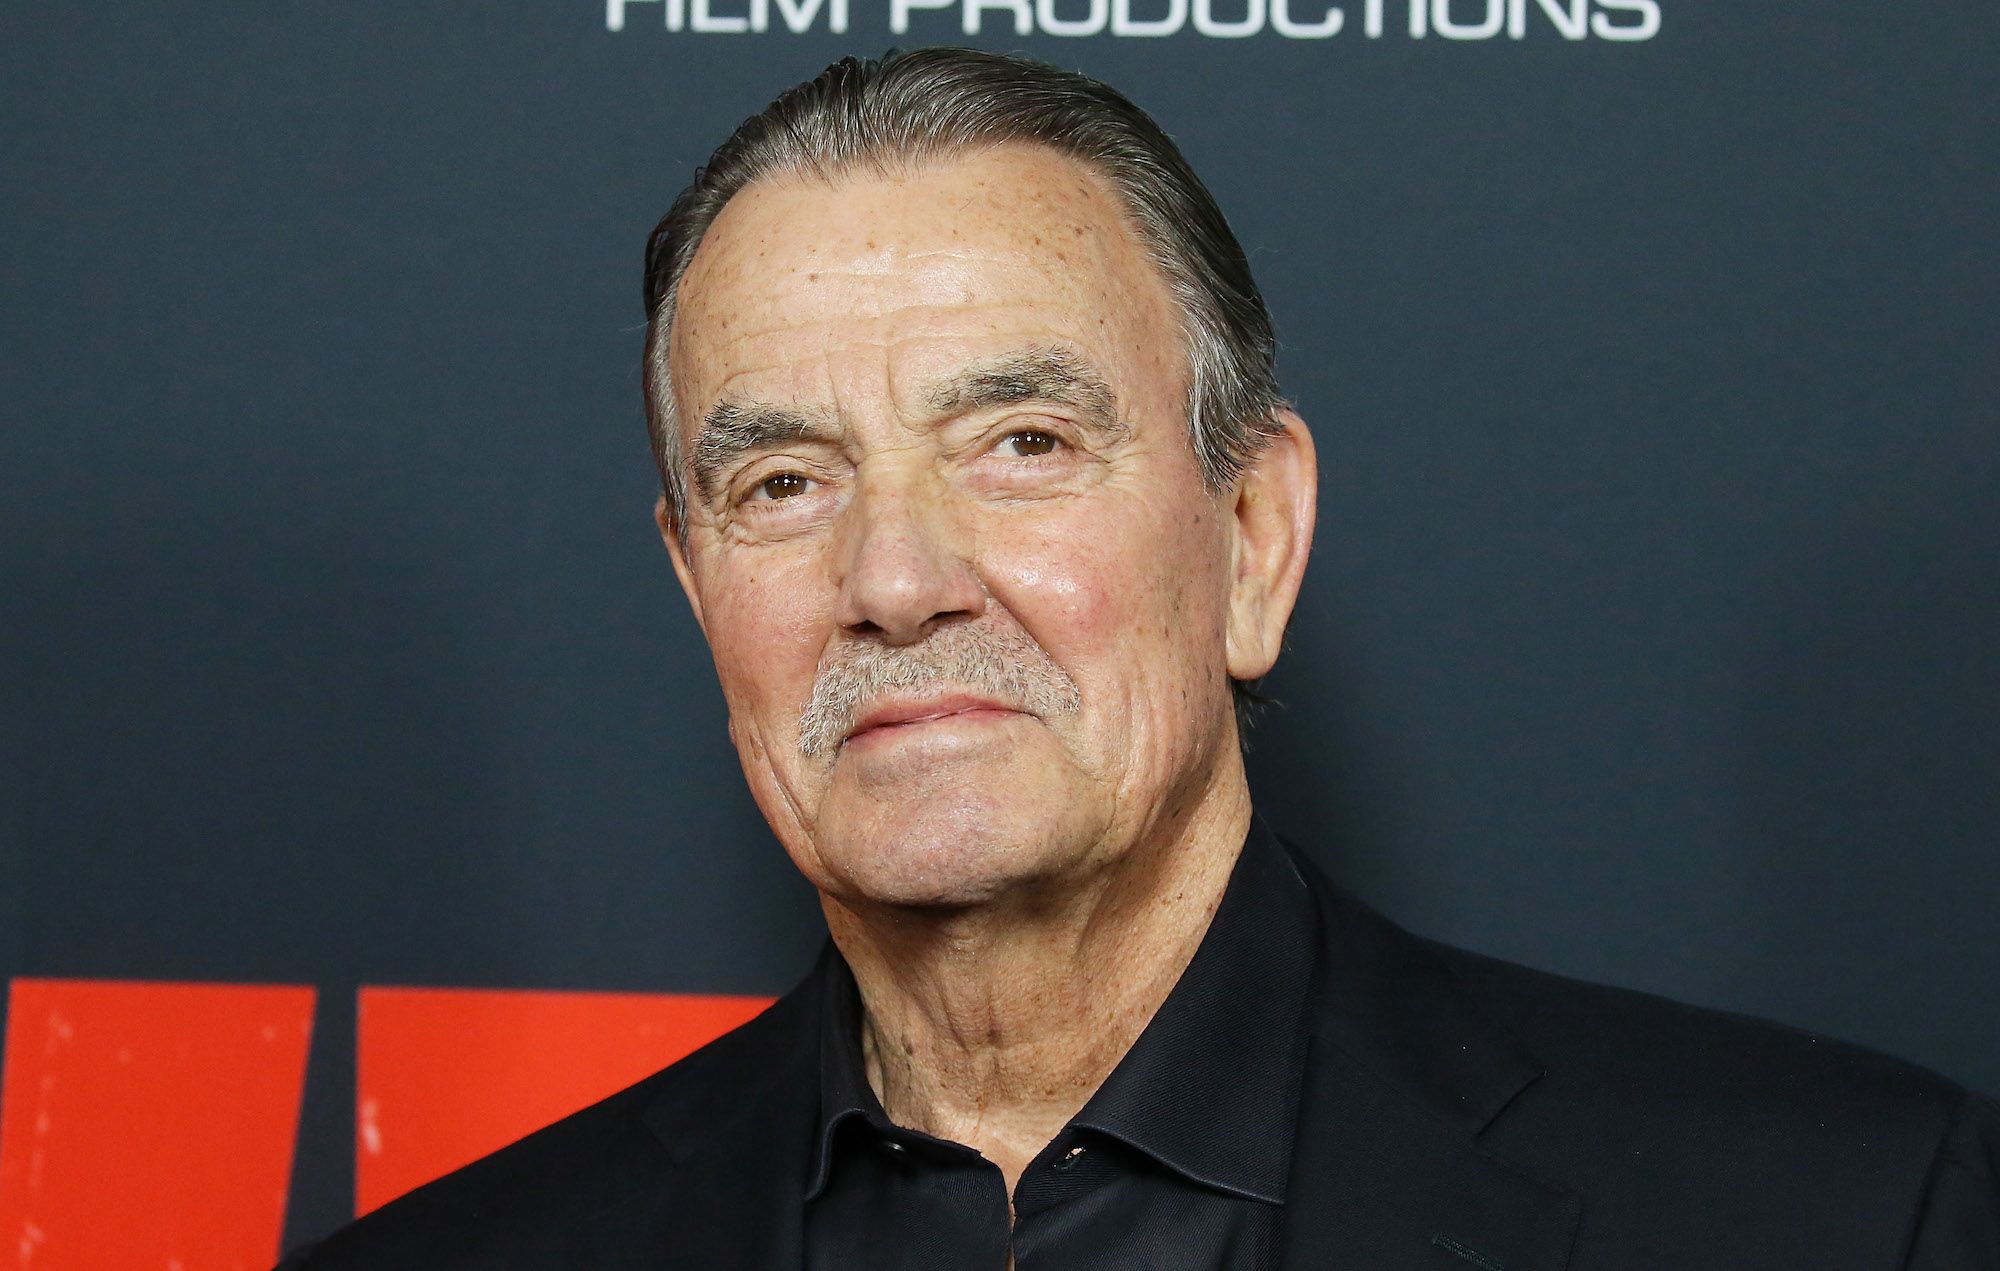 Eric Braeden, 'Young and the Restless' star, says he's now cancer-free | CNN